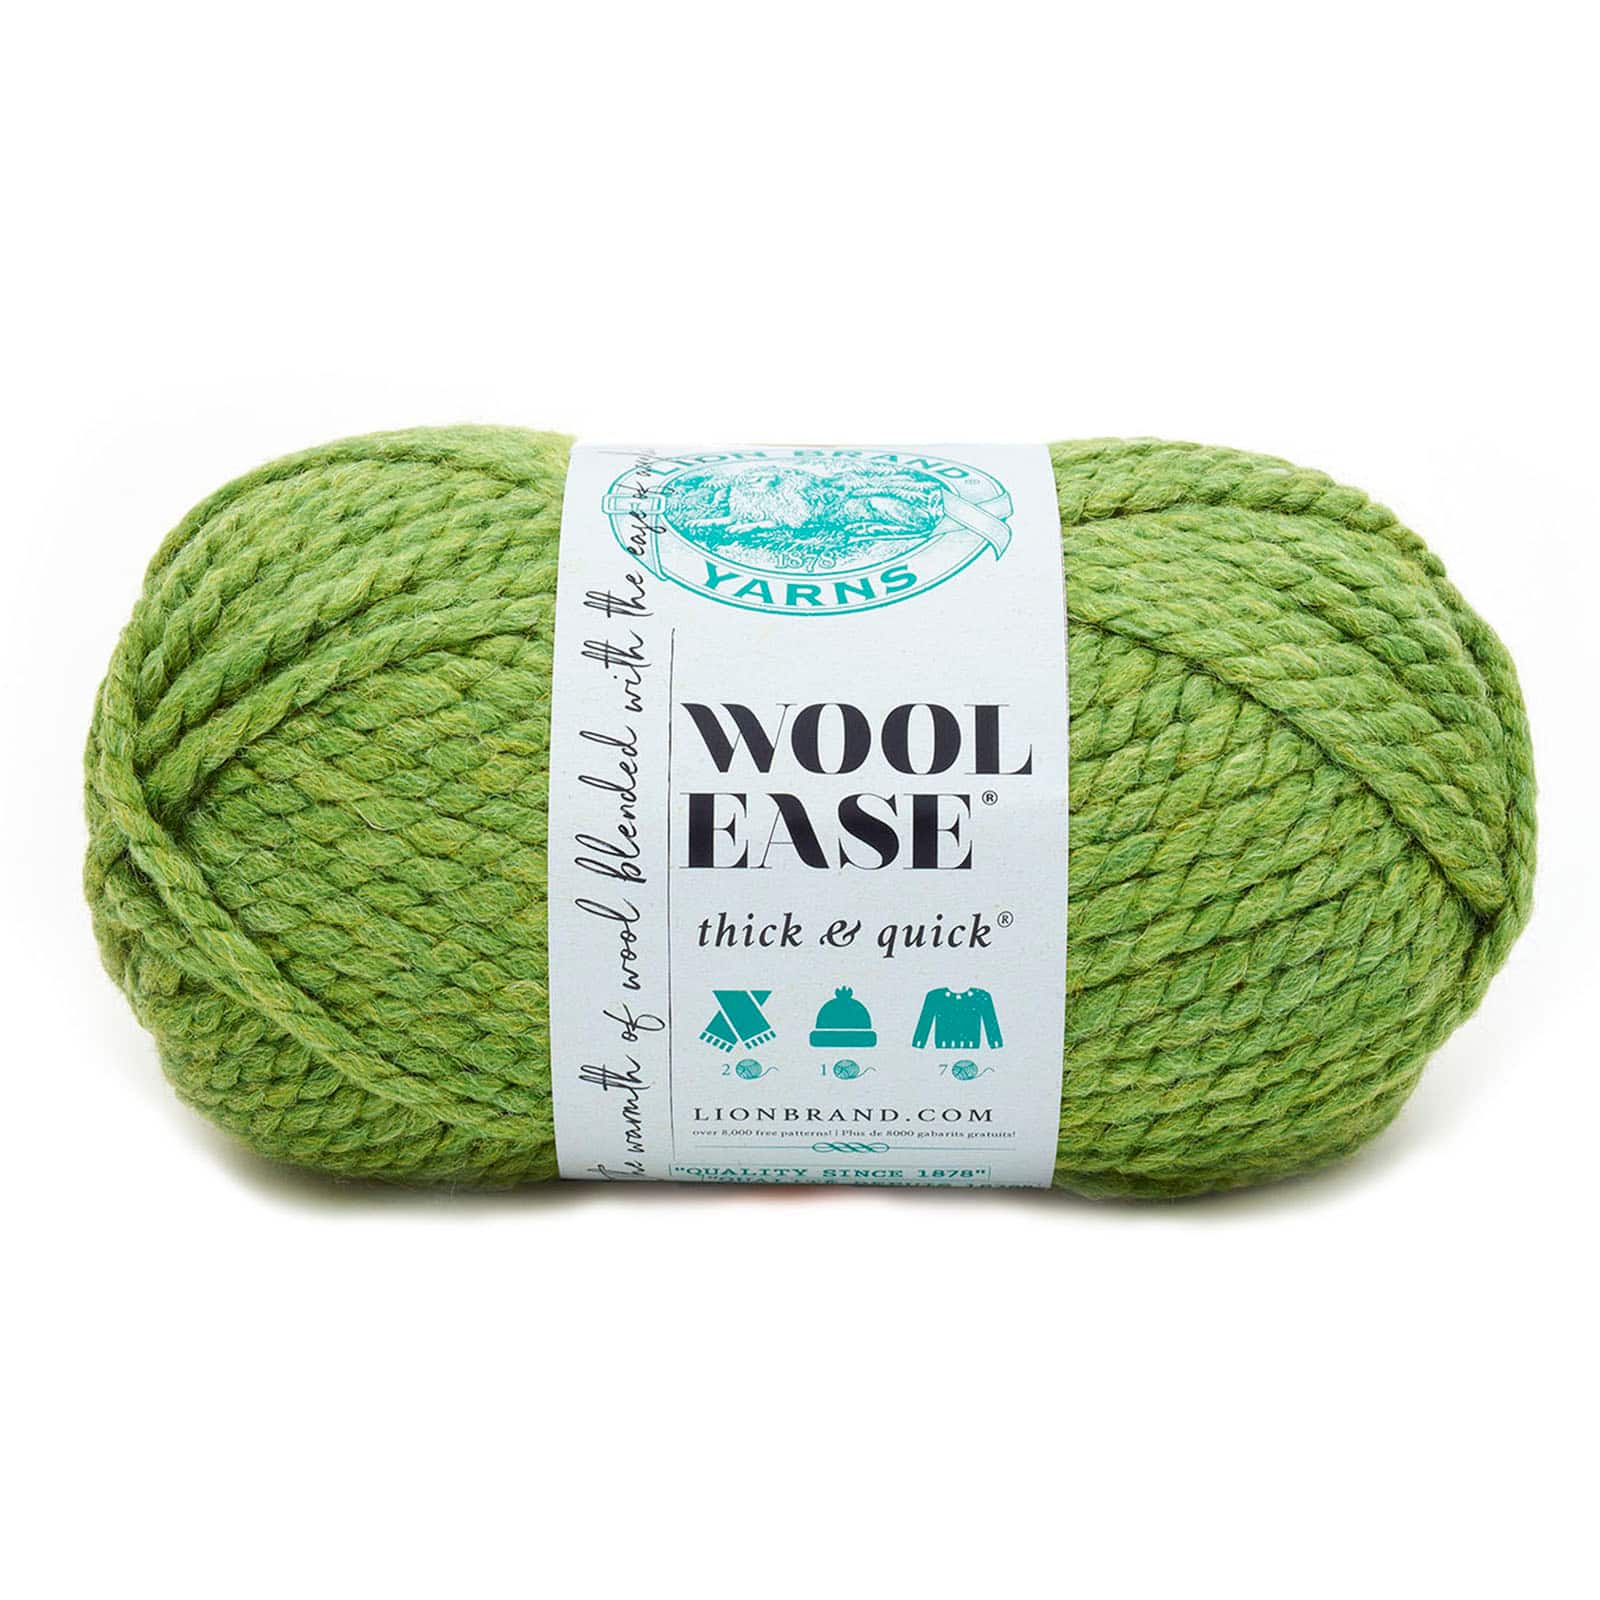 Lion Brand Yarn Wool-Ease Thick & Quick Yarn, Soft and Bulky Yarn for  Knitting, Crocheting, and Crafting, 1 Skein, Hudson Bay